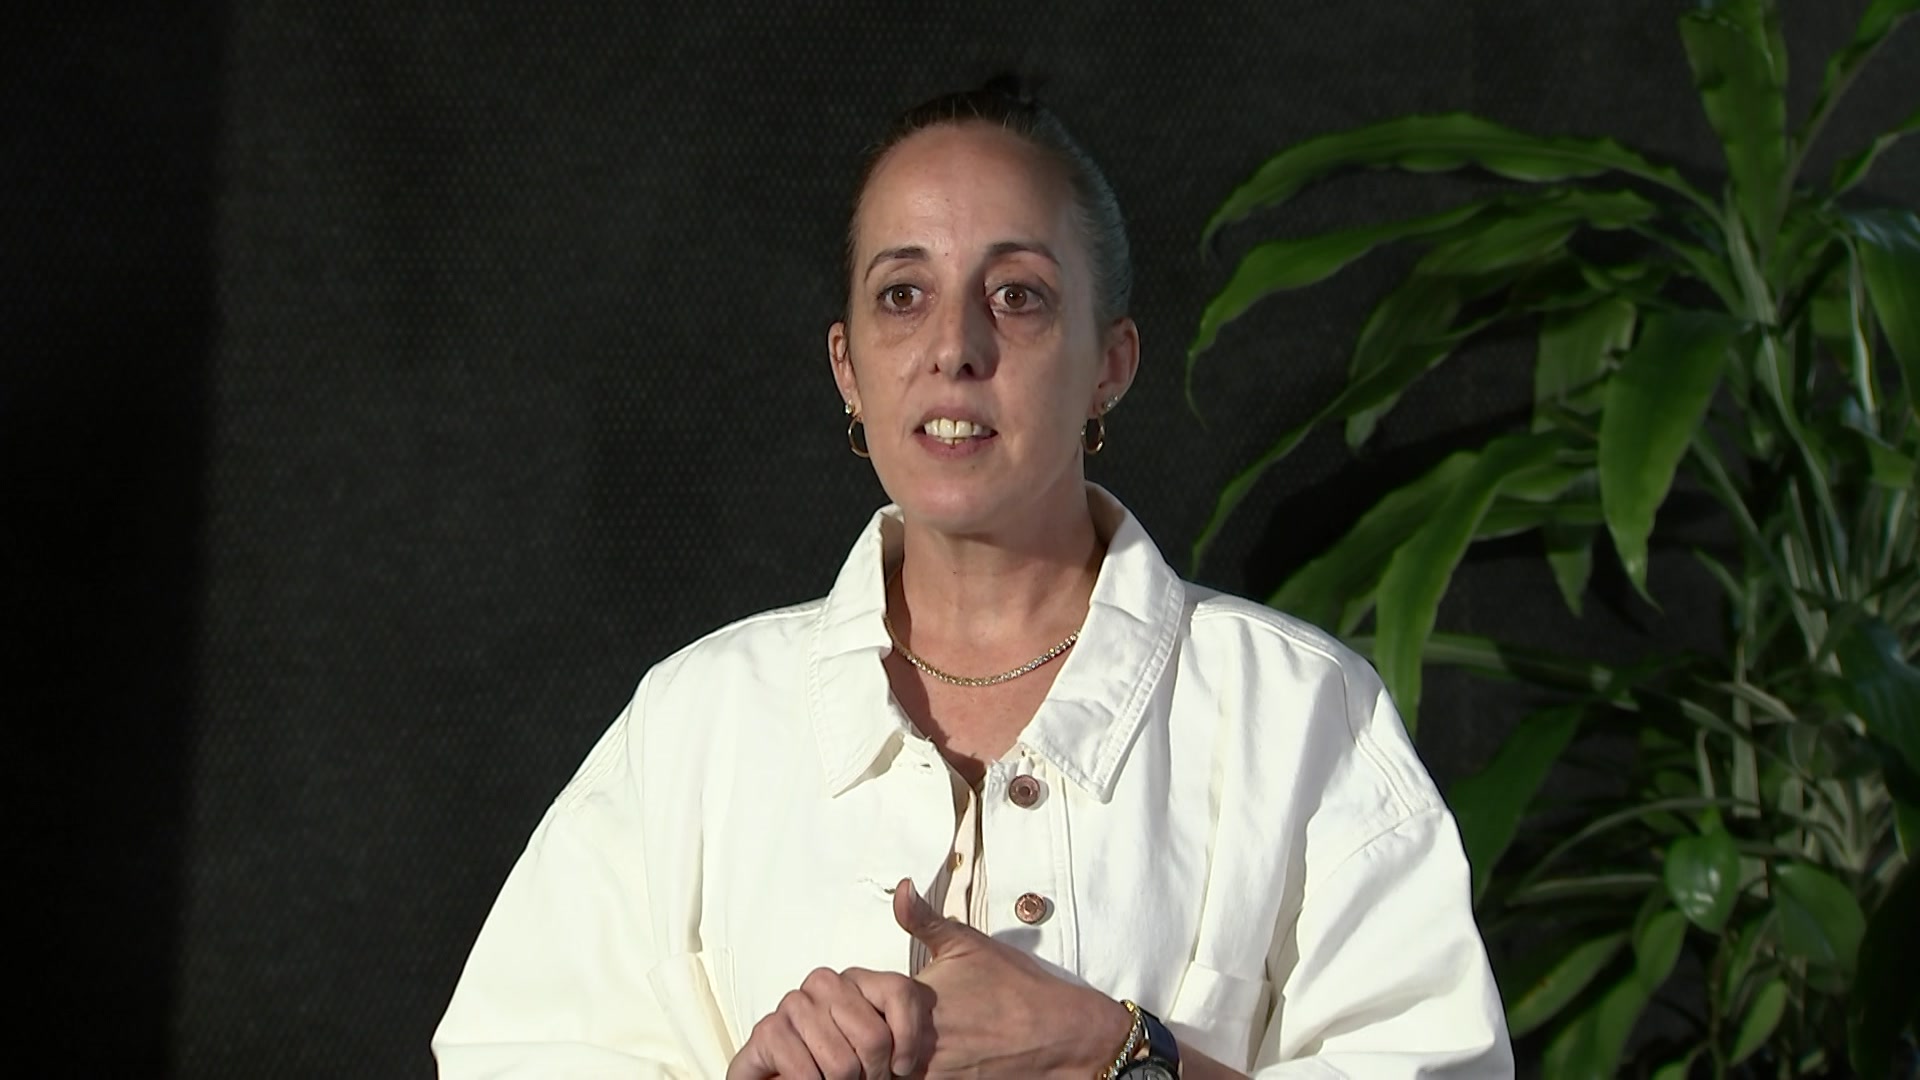 Woman in white jacket looks at an interviewer to the left of frame. There is a black backdrop behind her + a green plant.